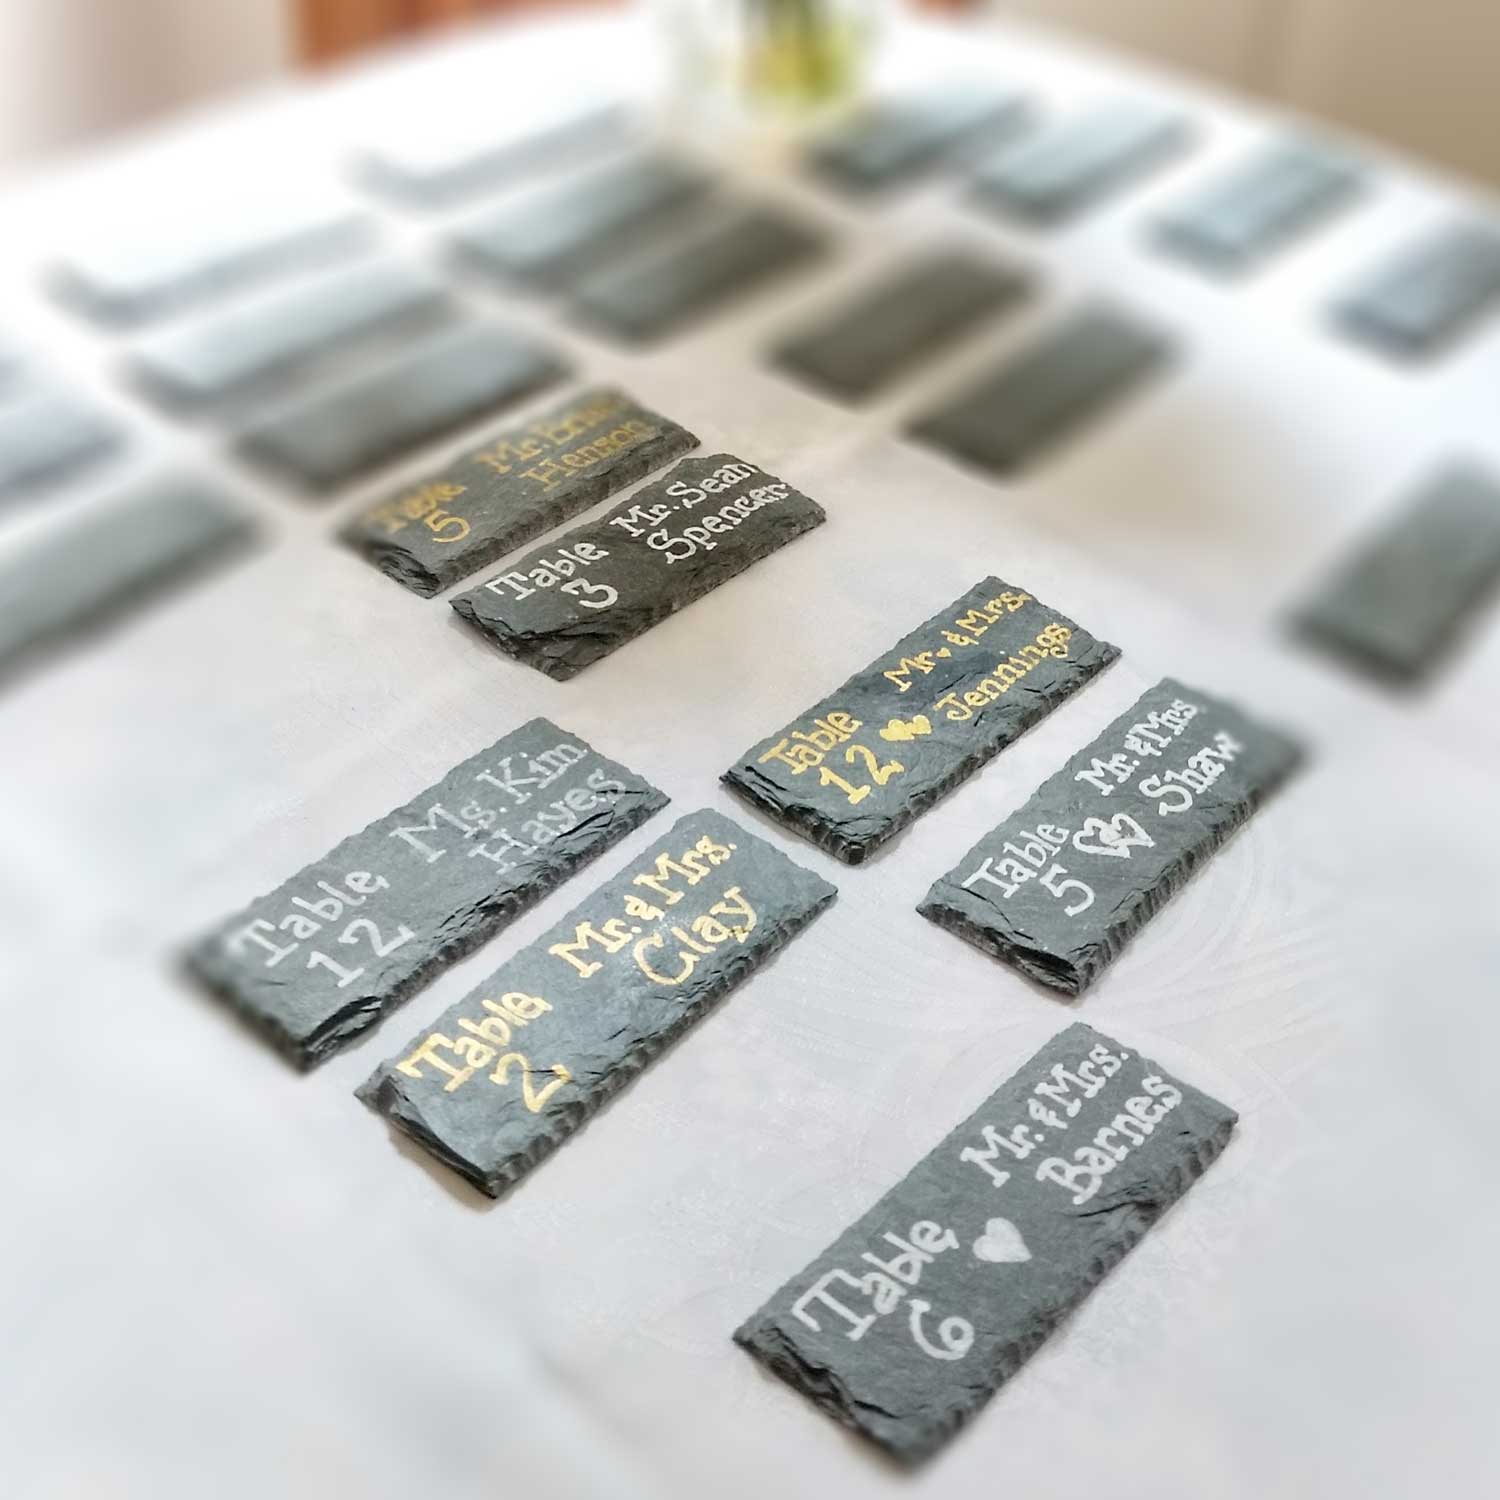 Slate wedding and event place cards on a white table cloth, each with names and table assignments written out.